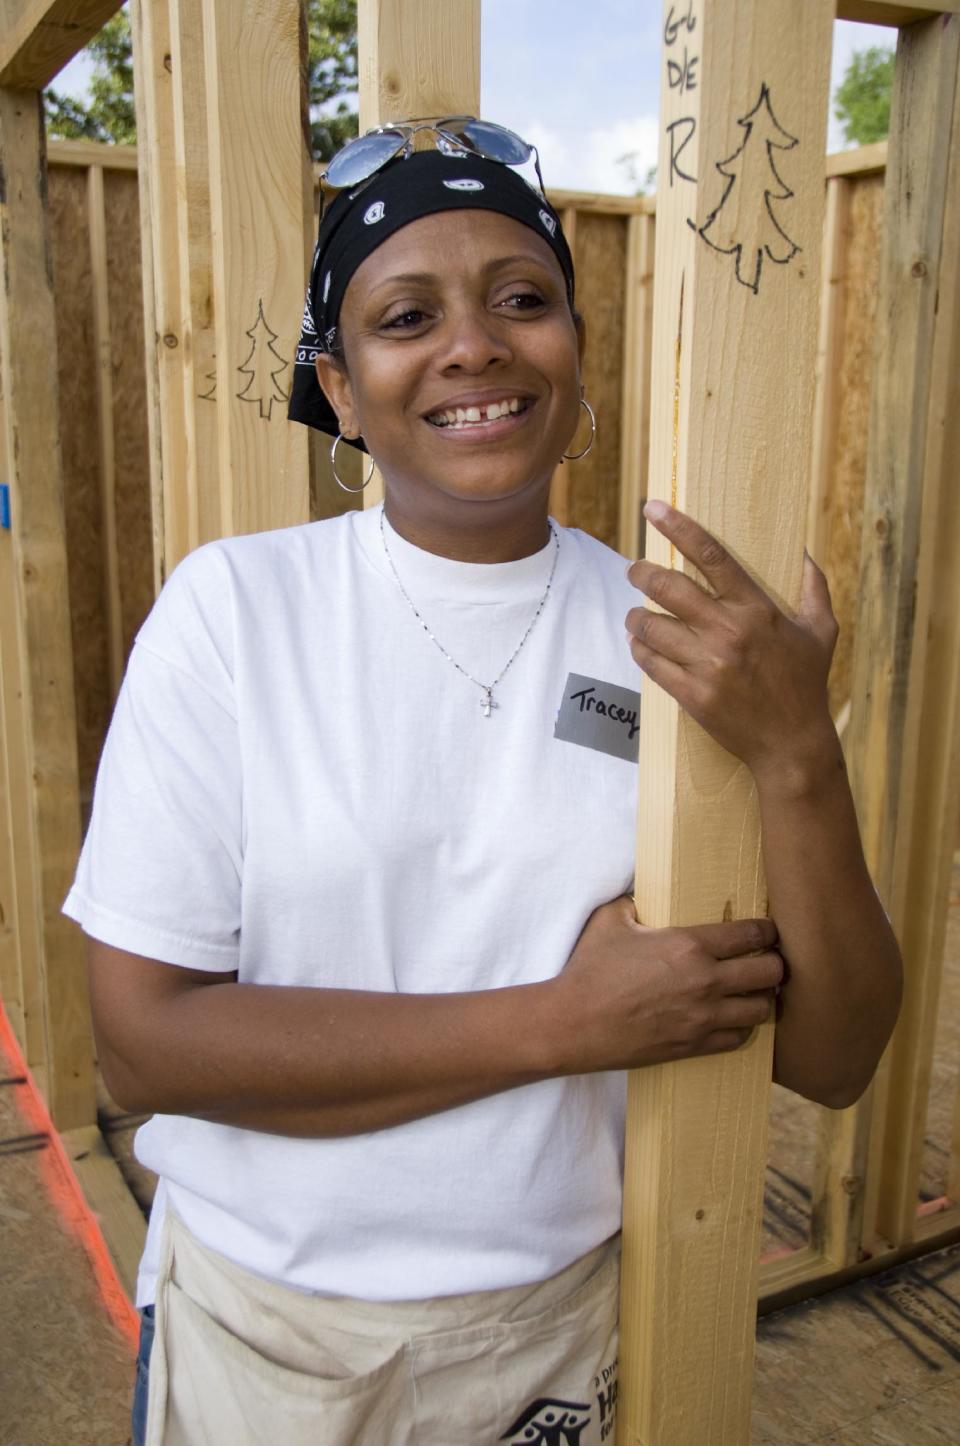 This April 2008 photo provided by Habitat for Humanity International shows Tracey Davison during the construction of her new home in Pascagoula, Miss. The boards with trees drawn on them came from the Rockefeller Center Christmas tree, which was milled for lumber in January 2008. This year will be the seventh year that the Rock Center tree is going to be donated to Habitat for Humanity to be used in building a new home. (AP Photo/Habitat for Humanity Internationa, Ezra Millstein)